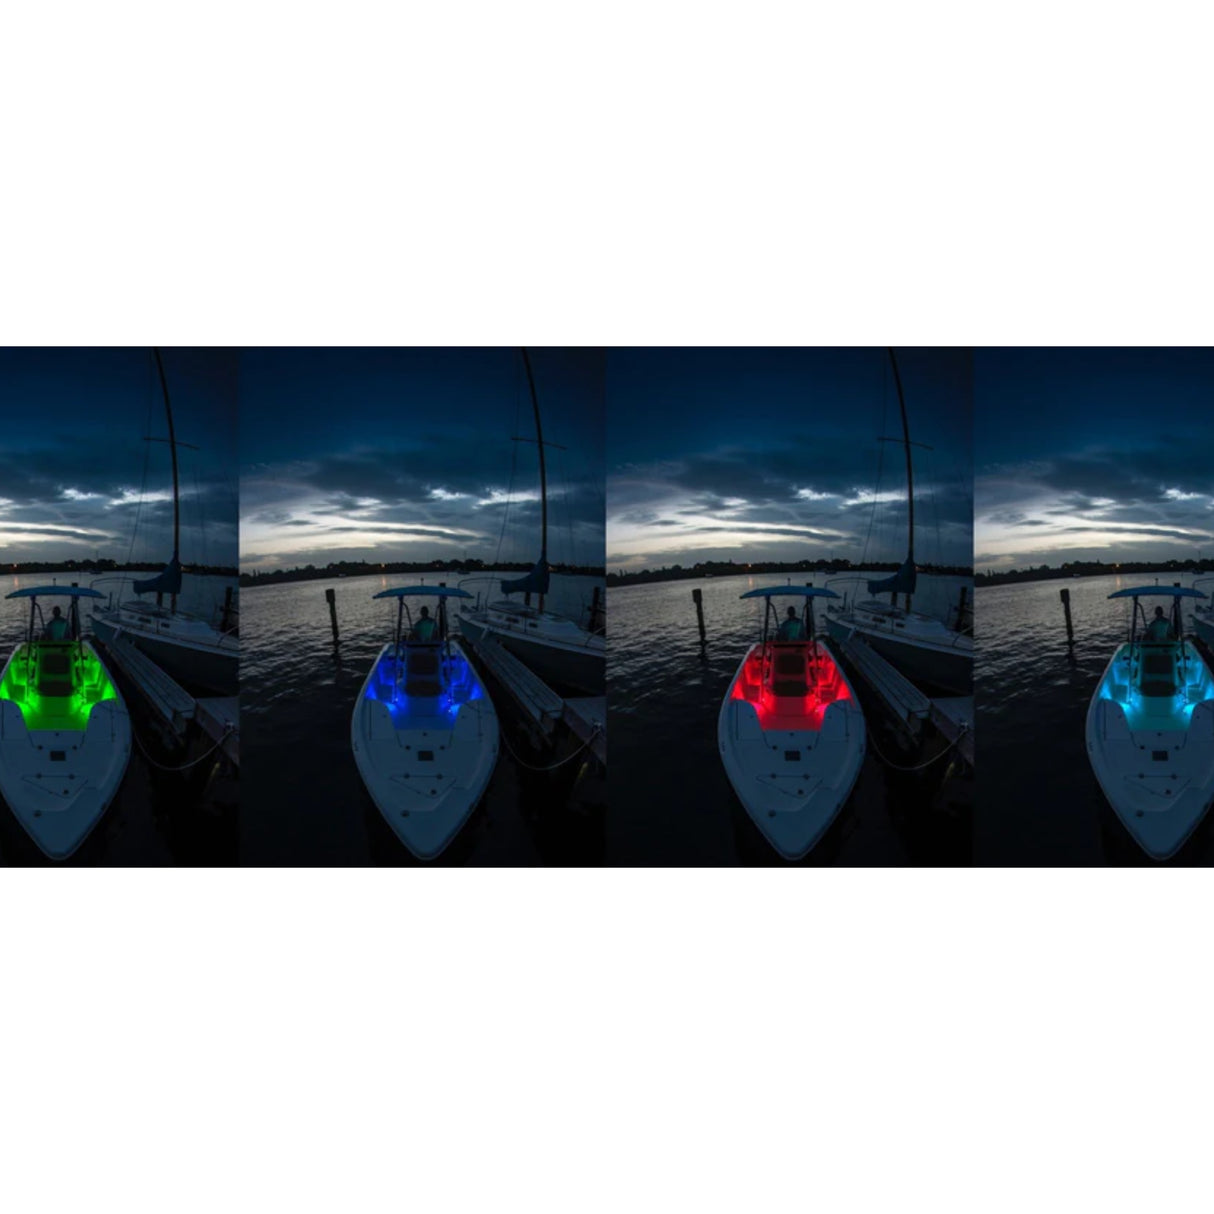 Stinger 6.5" White Coaxial Marine Speakers With Built-In Multi-Color Rgb Lighting - PROTEUS MARINE STORE